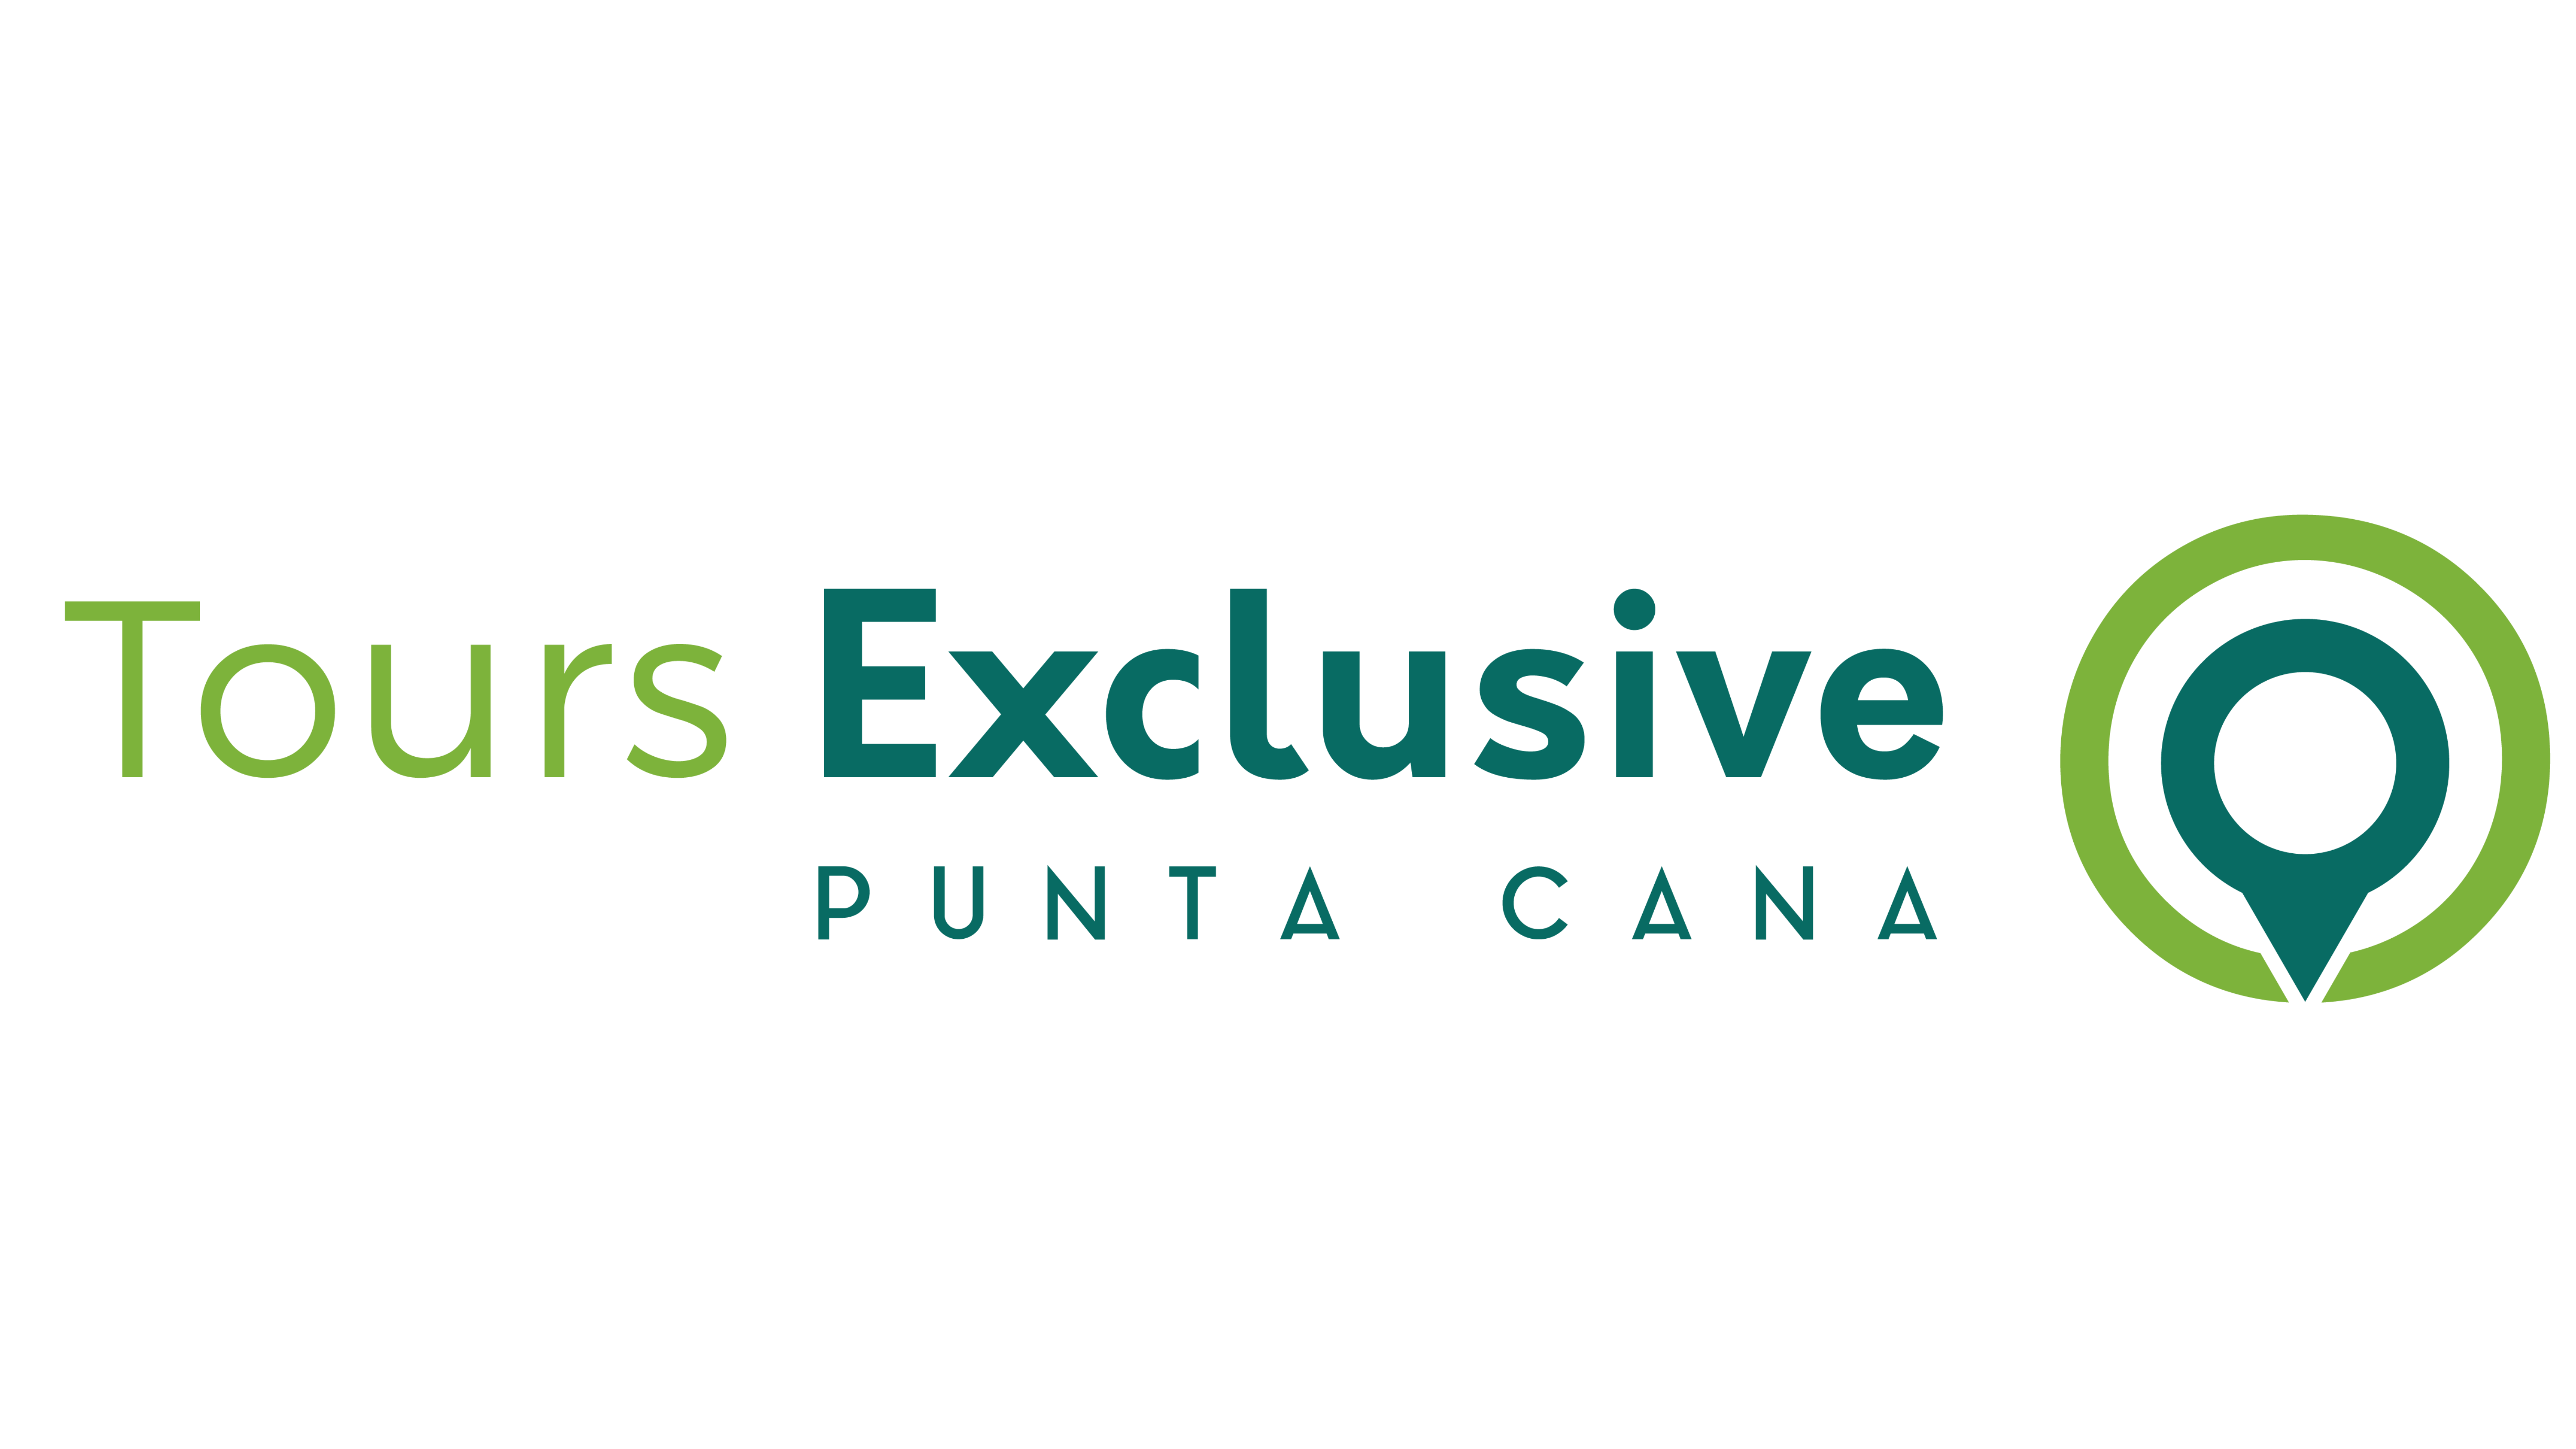 Tours Exclusive Punta Cana